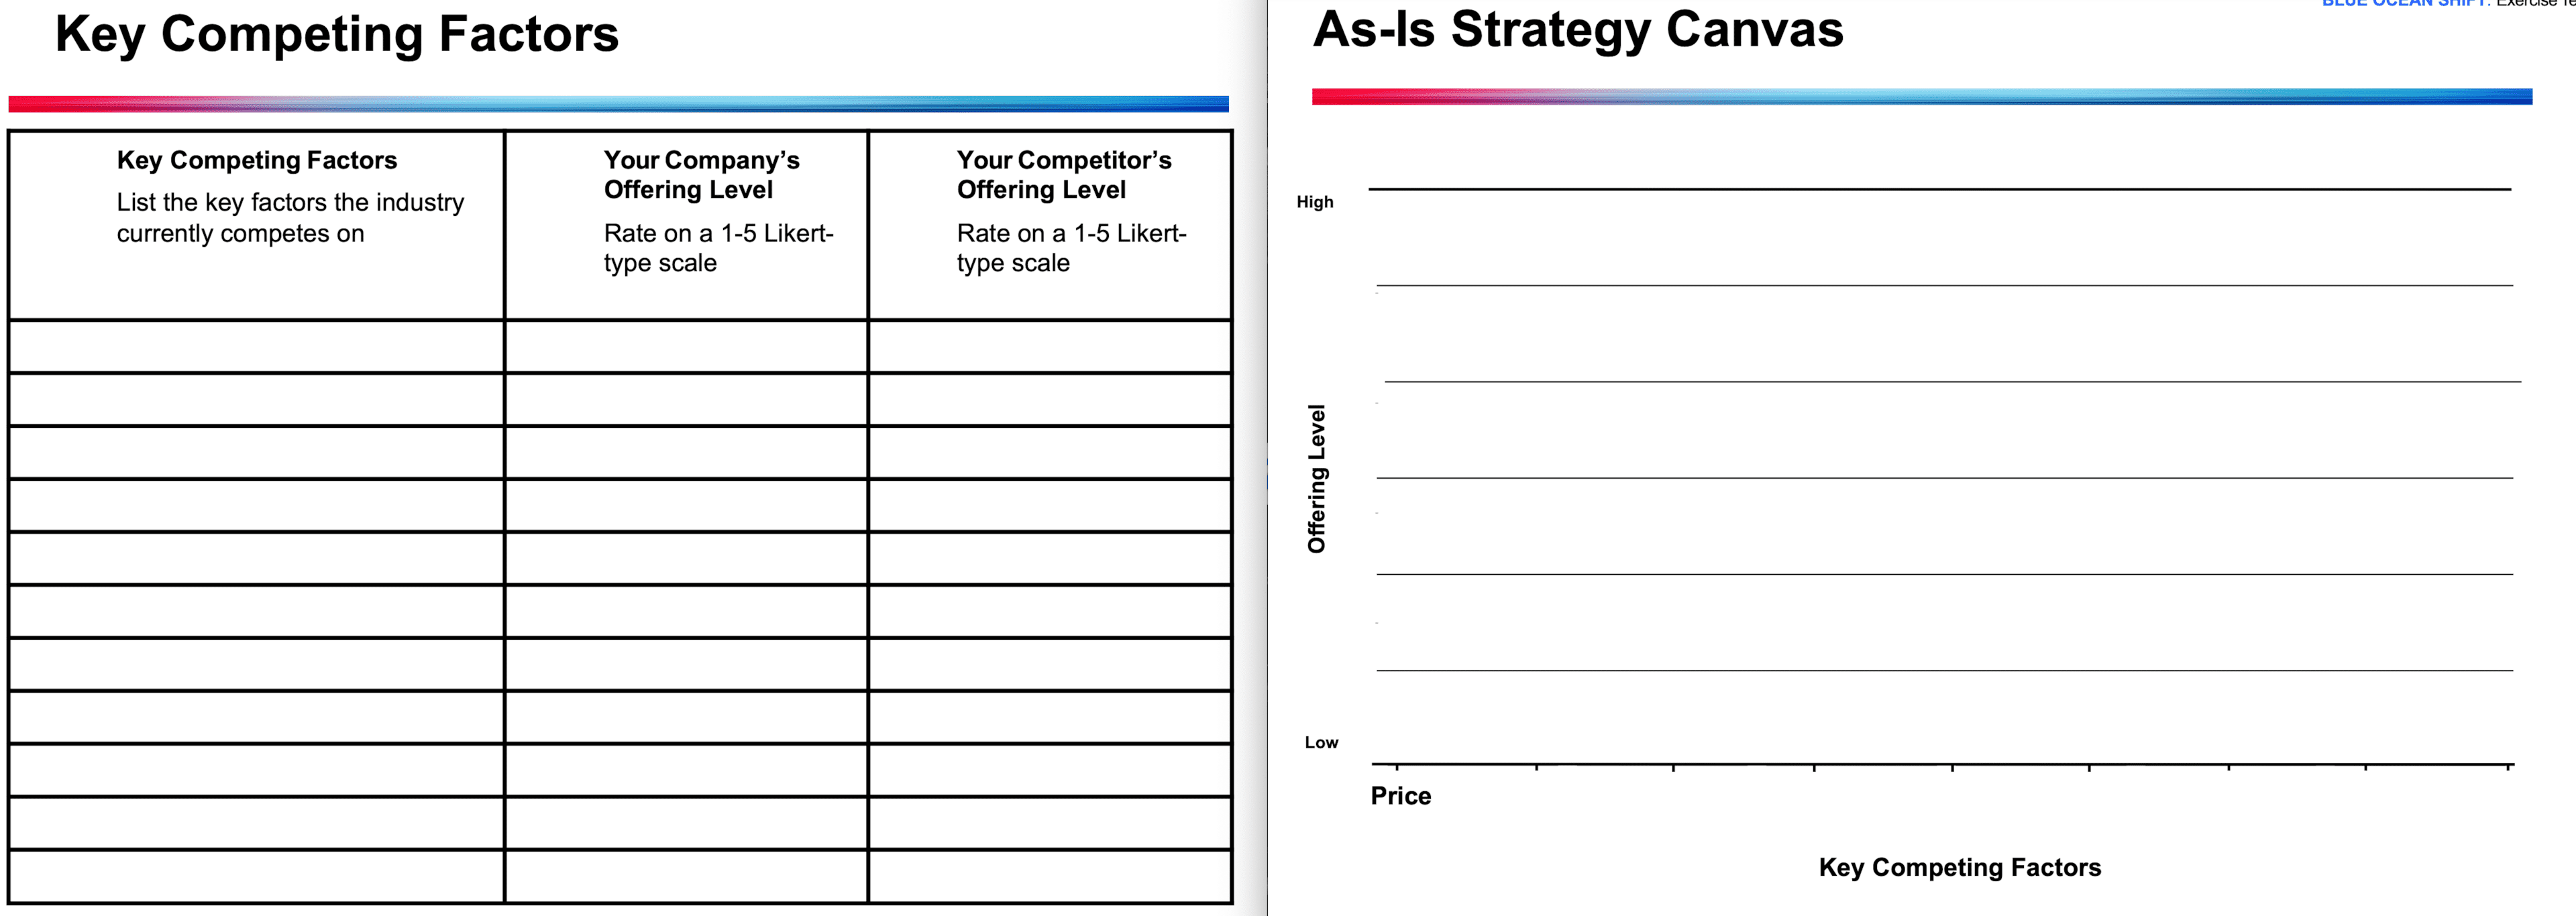 Value Curve or Strategic Canvas Template